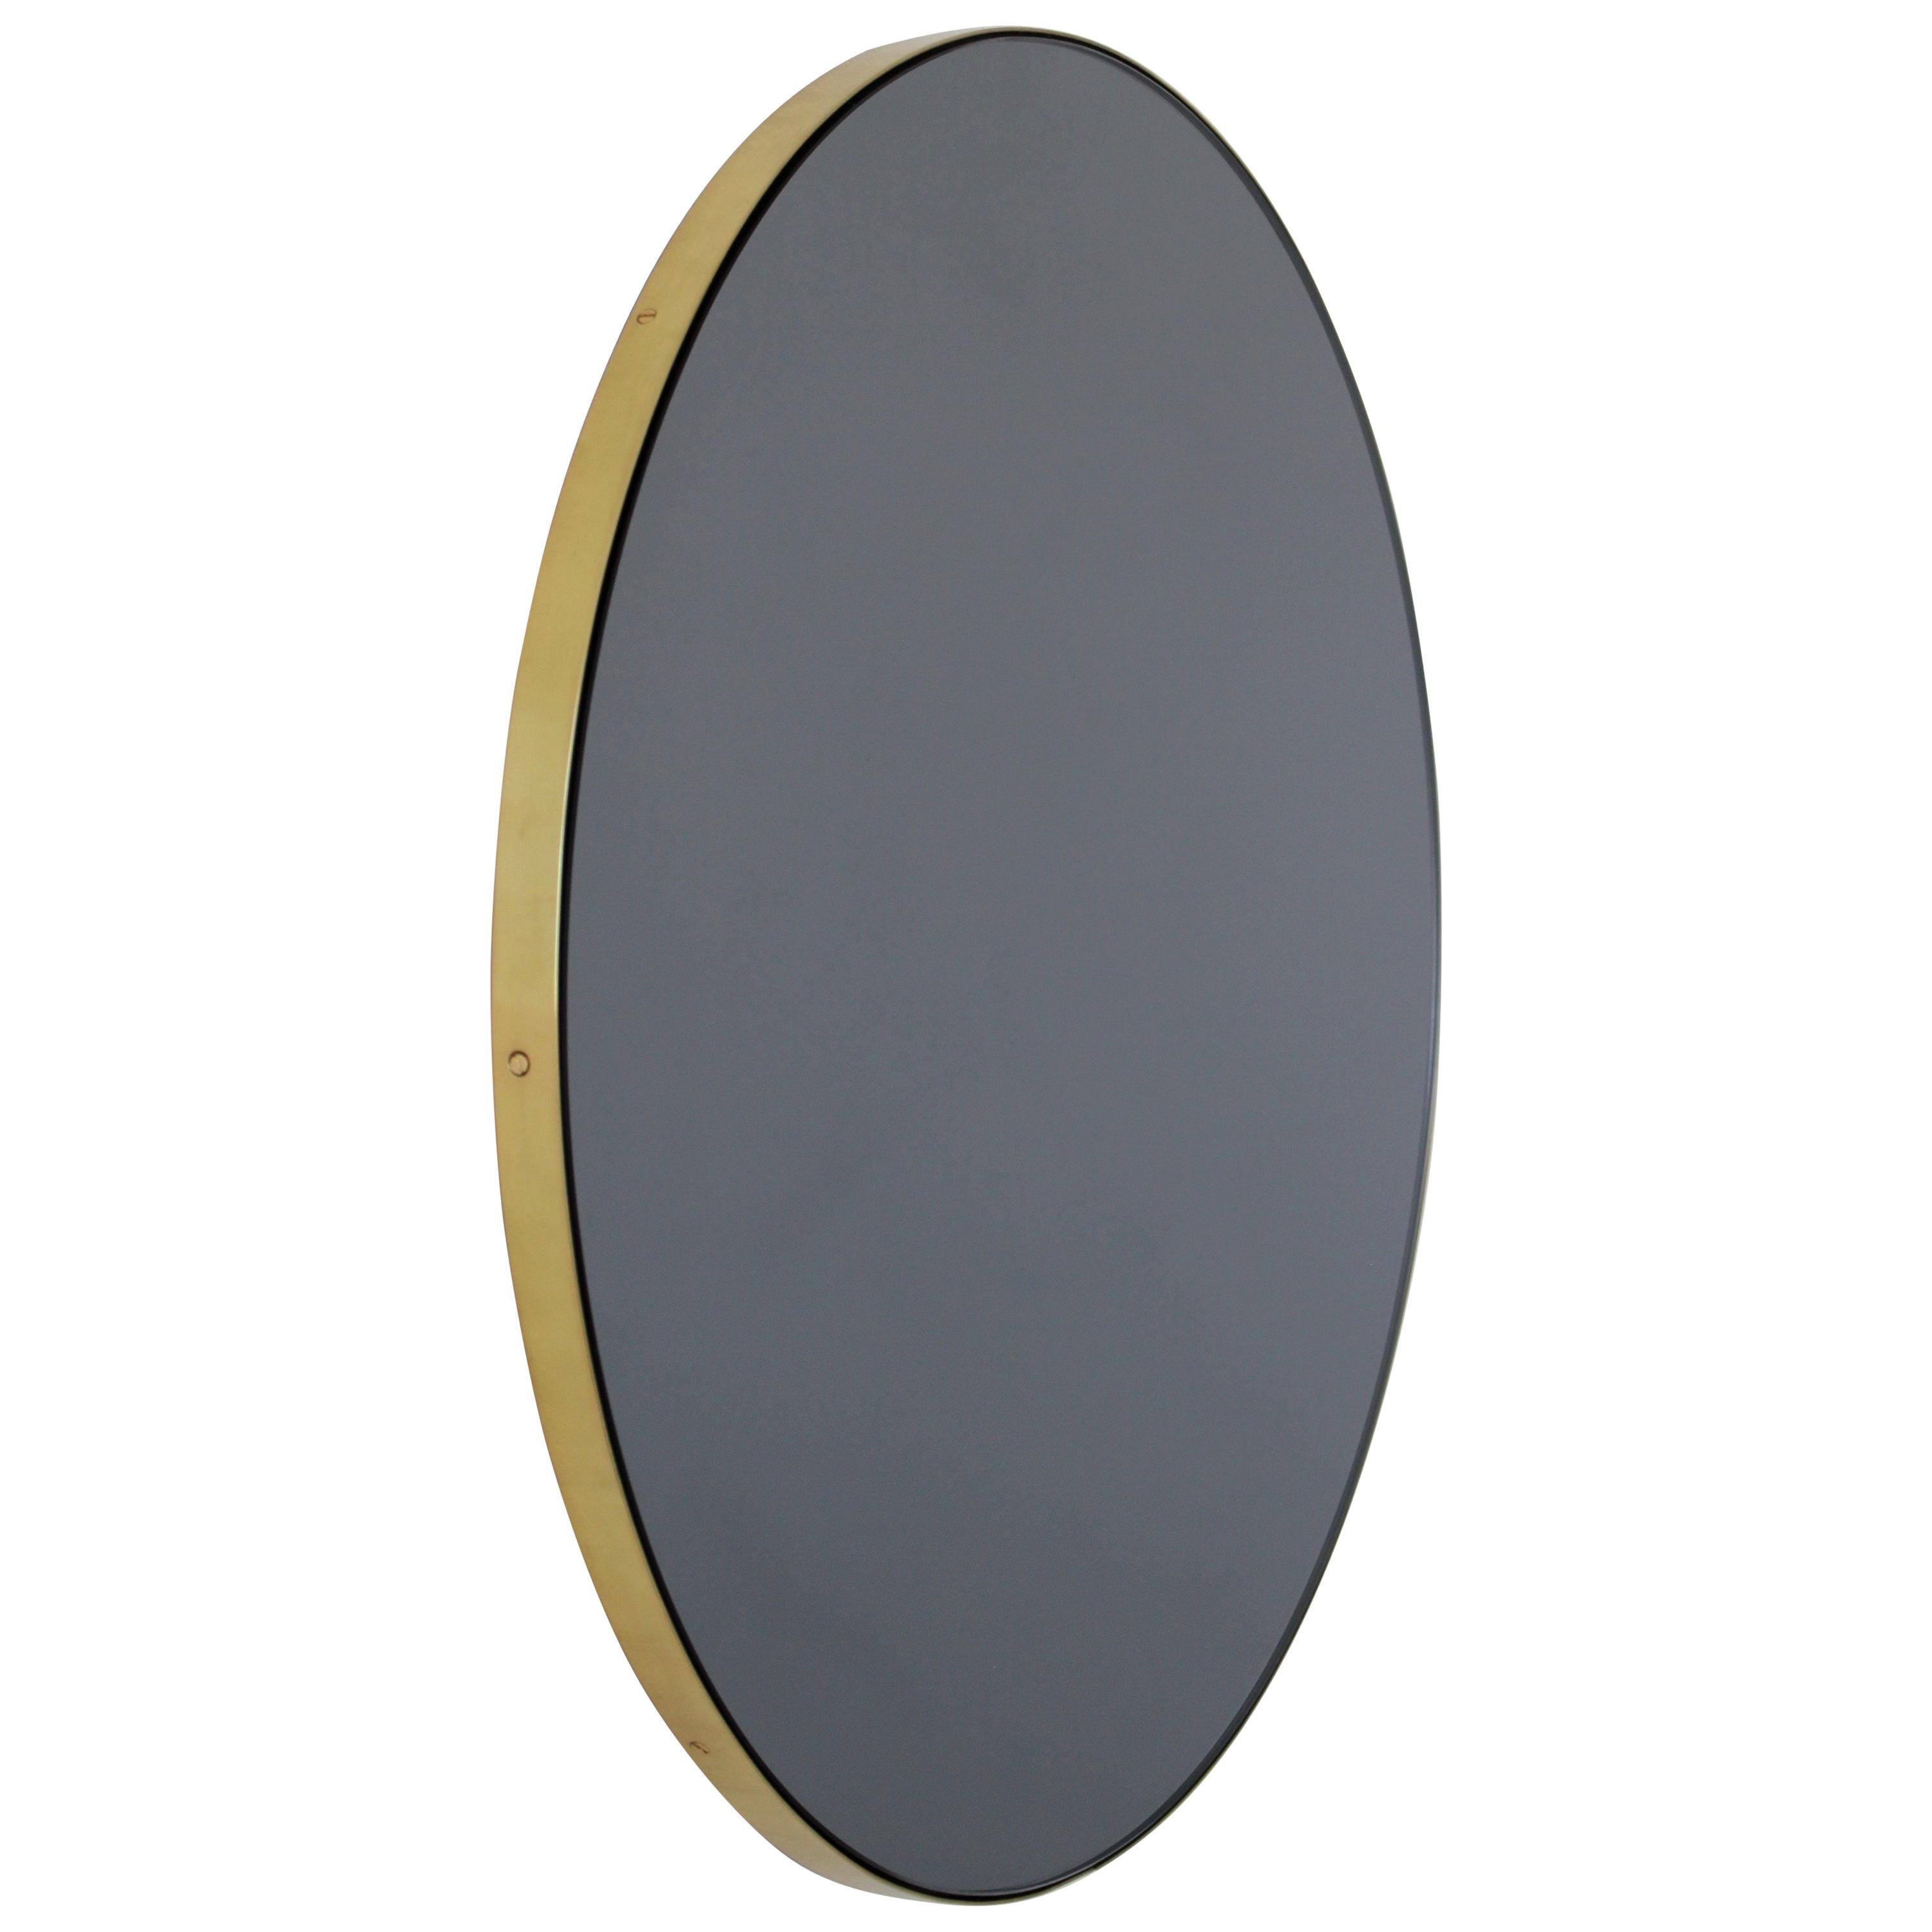 Orbis Black Tinted Round Contemporary Mirror with a Brass Frame, Small